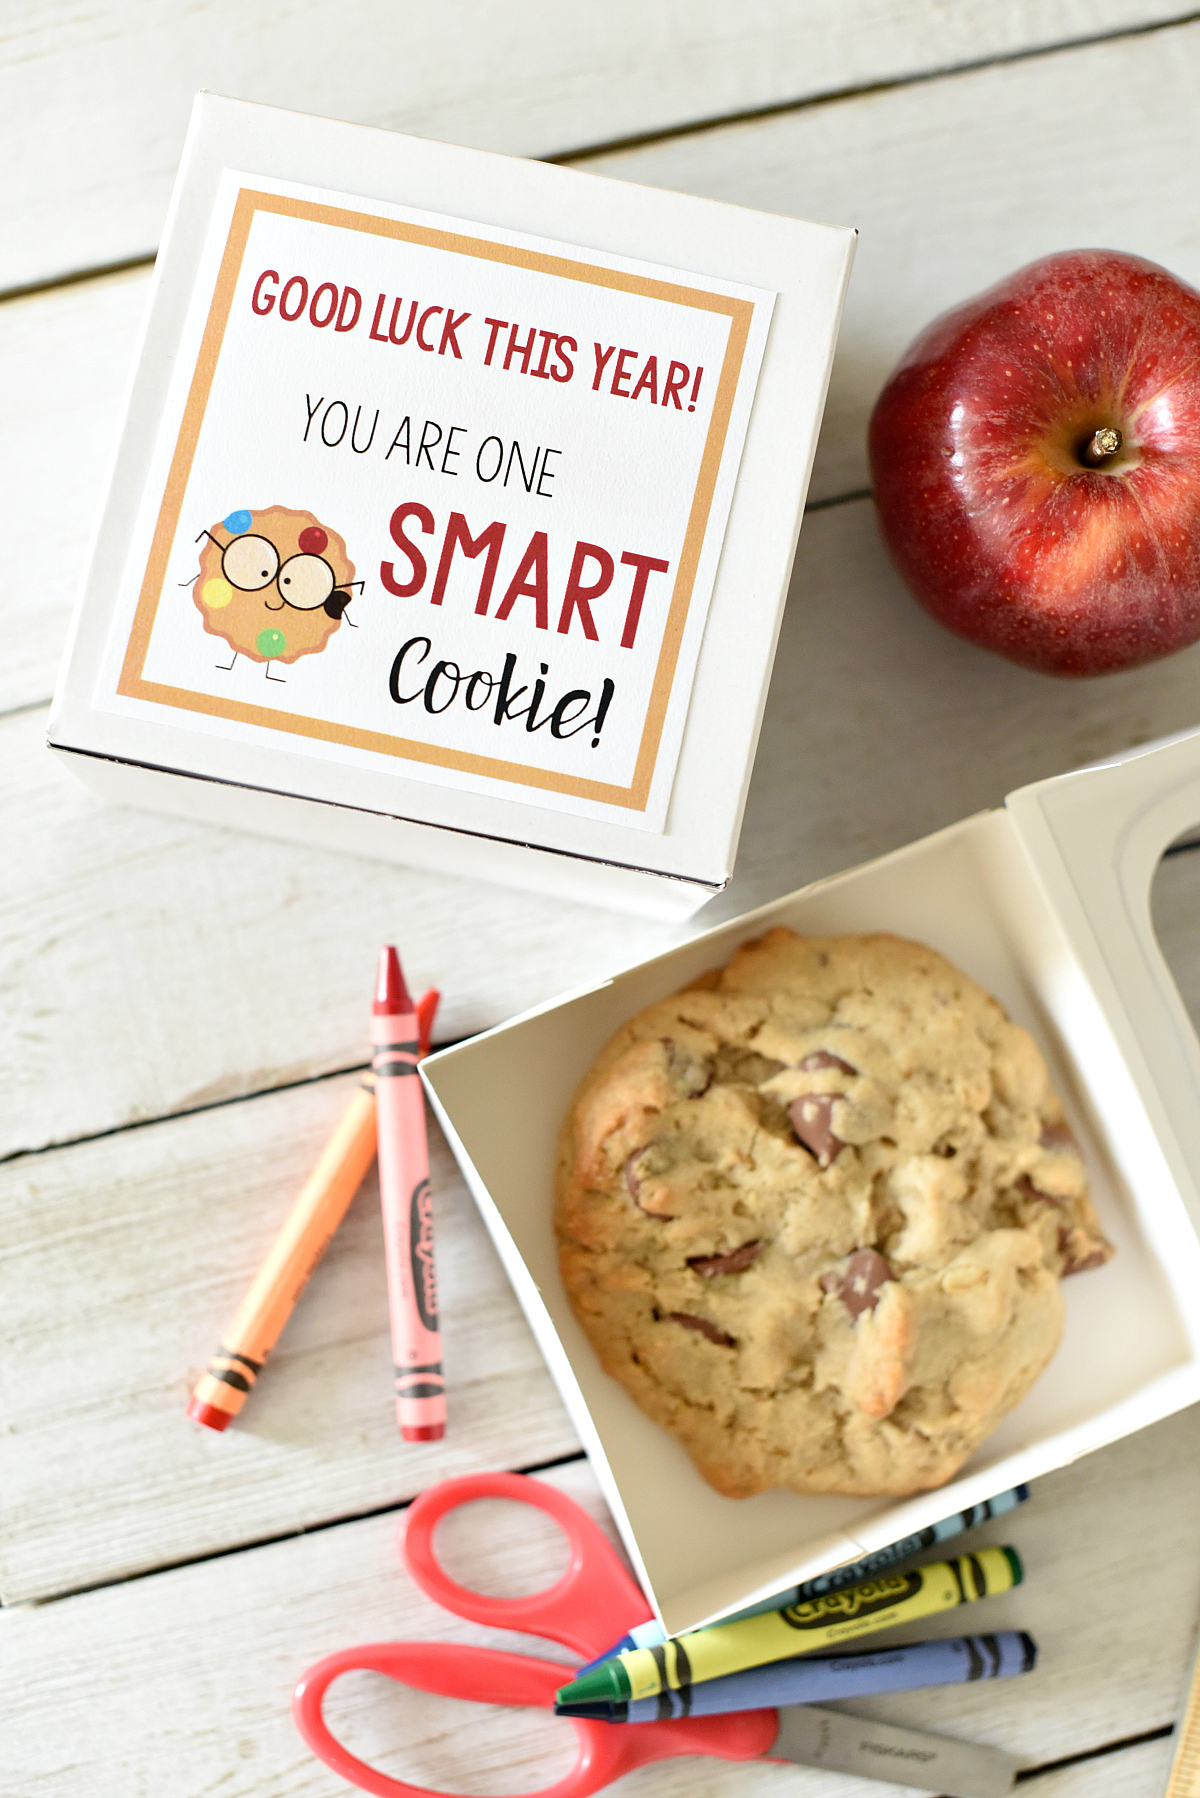 First Day of School Gifts: This cute "Smart Cookie" gift is fun for students on the first day of school. All you have to do is grab a cookie and add a tag and you're all set for back to school fun #backtoschool #kids #kidsgifts #giftideas